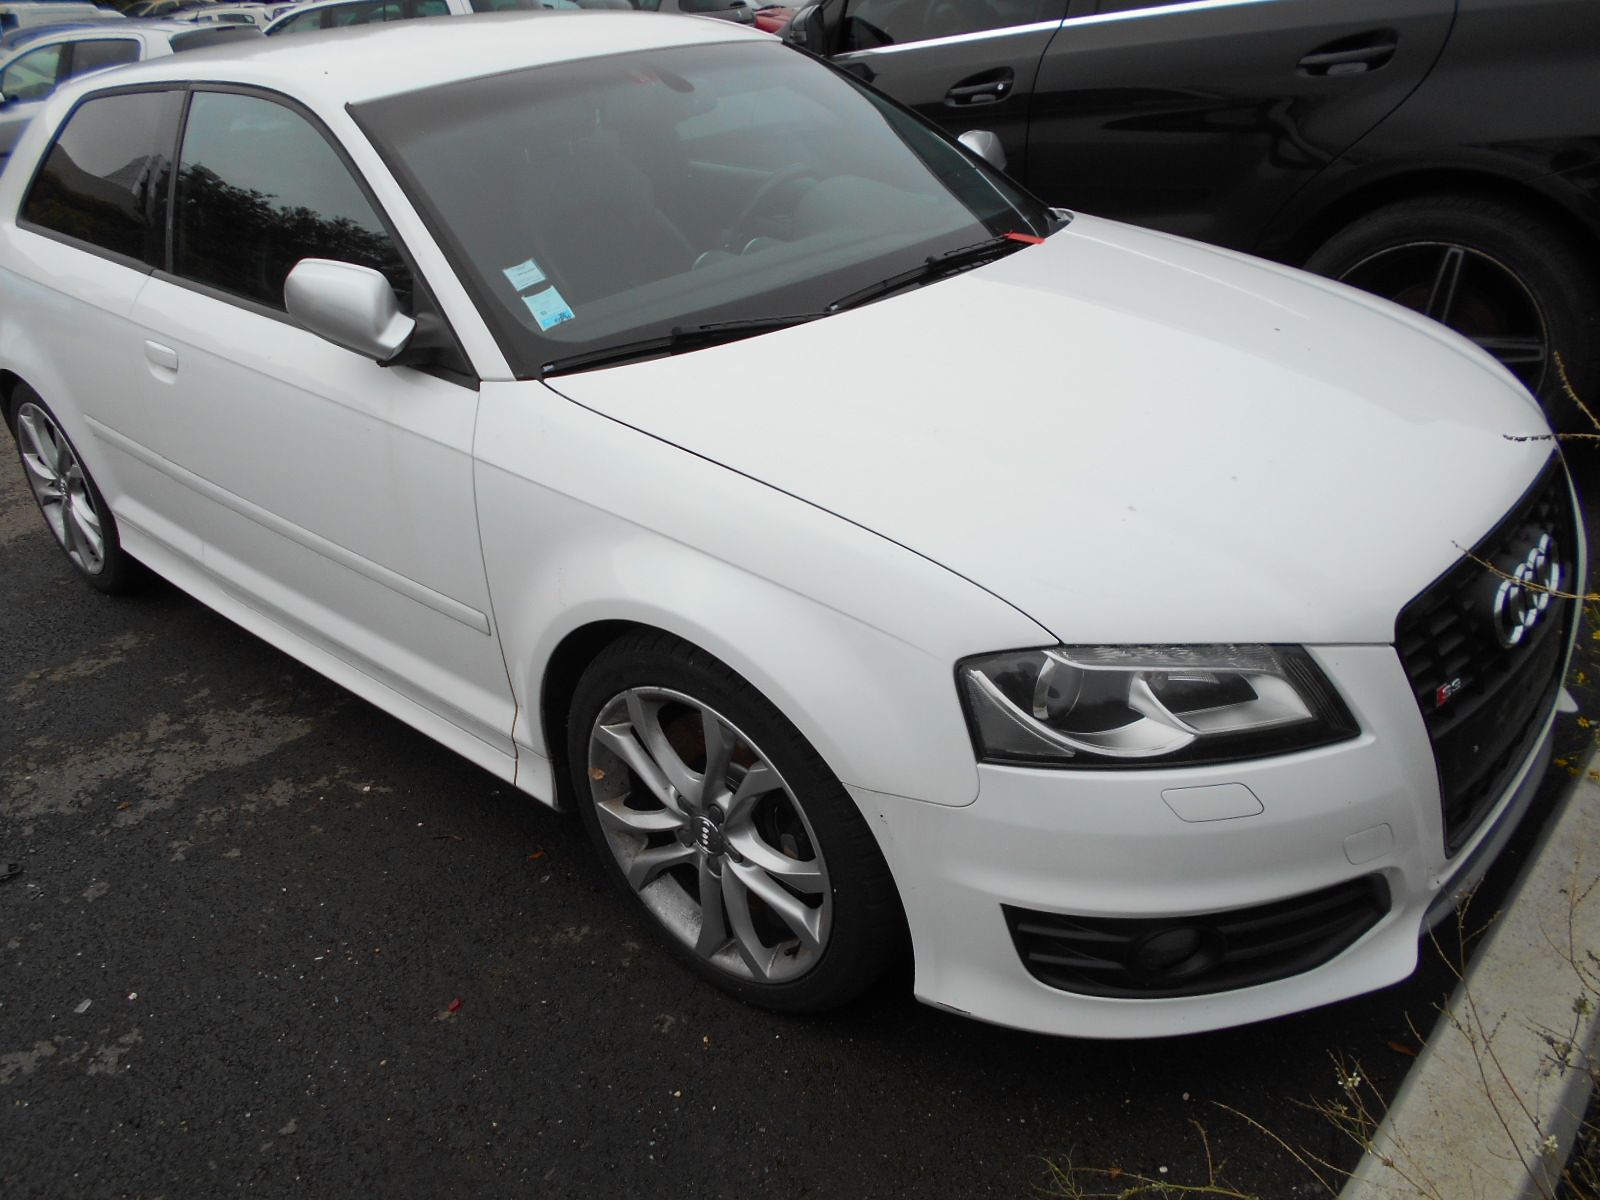 Null [RP][ACI] Reserved for automotive professionals

	 AUDI S3 not registered, &hellip;